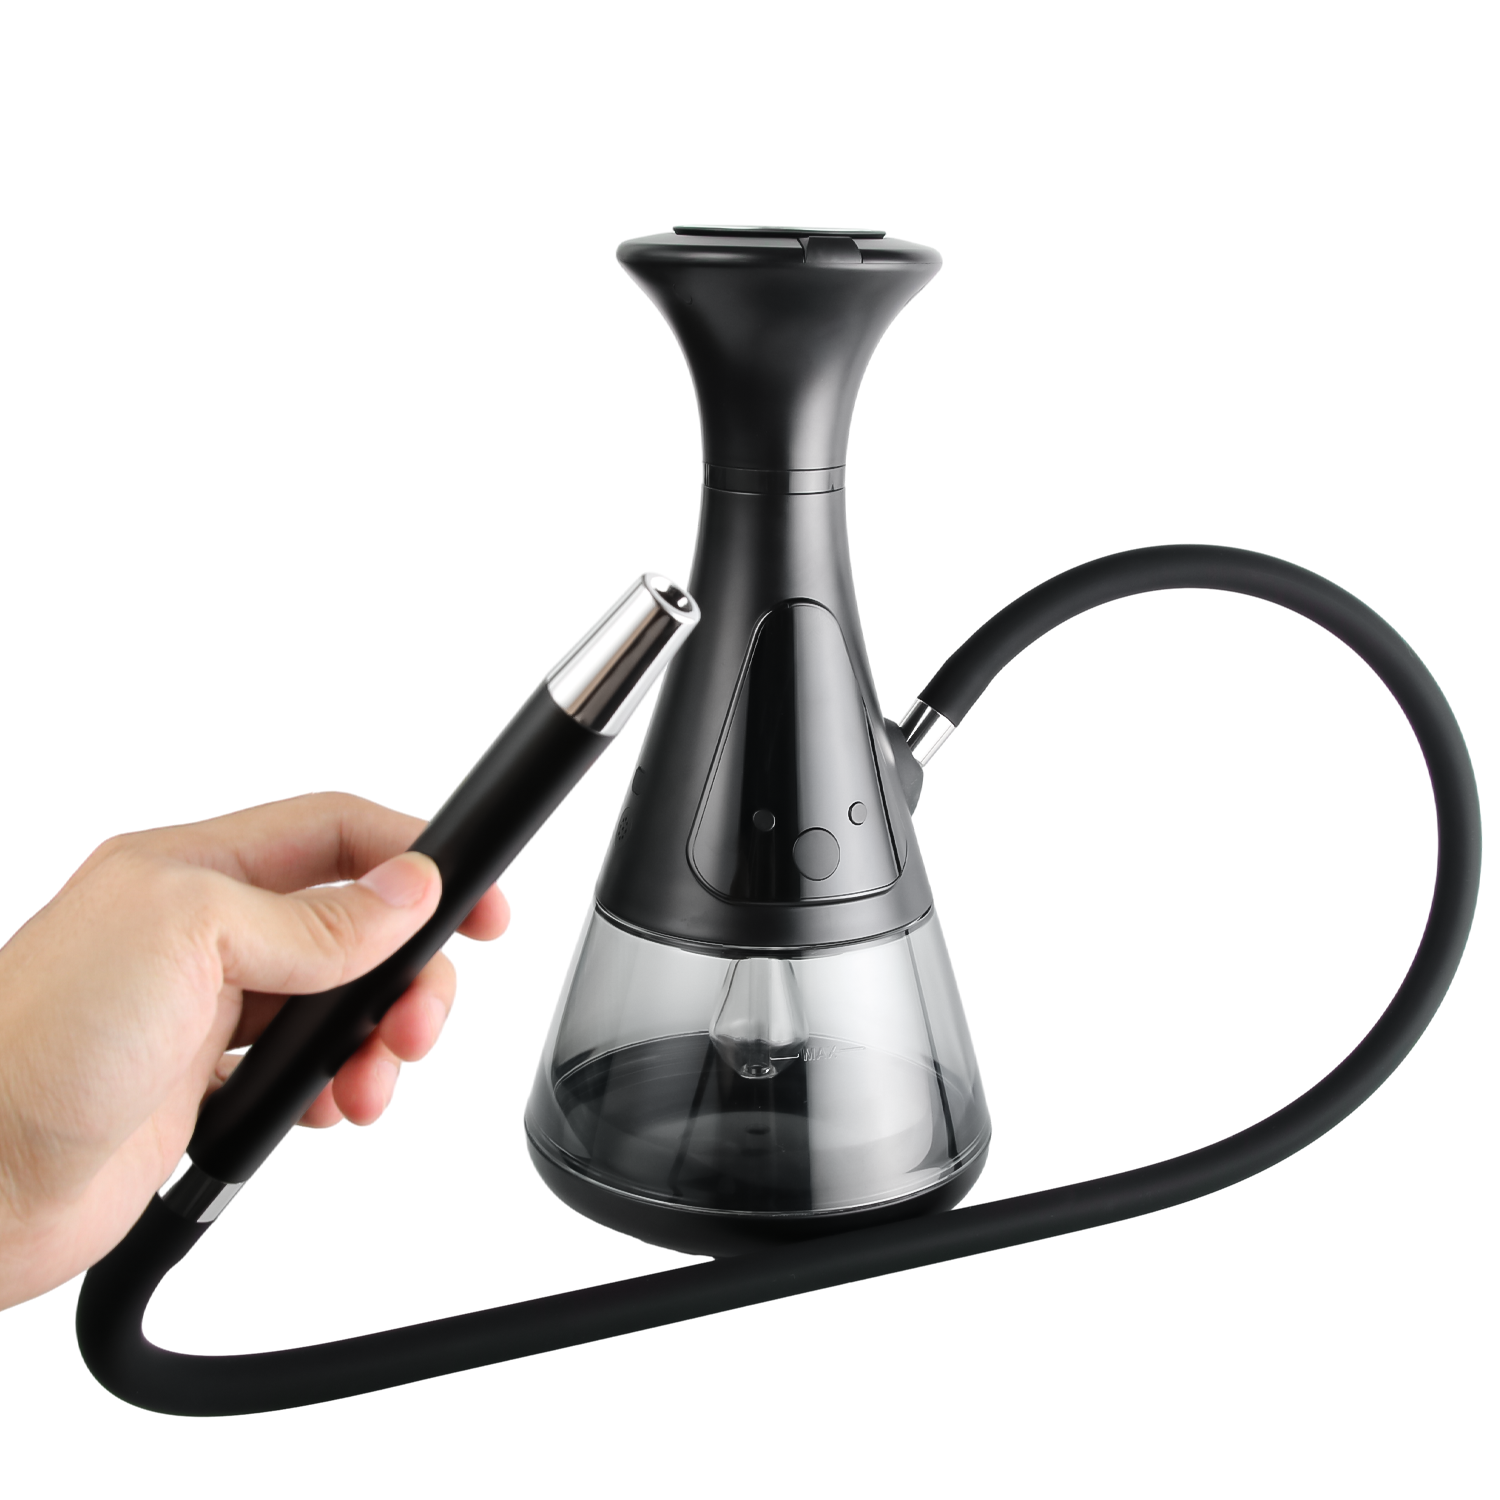 LONGMADA ELECTRON HOOKAH SHISHA WITH LED LIGHT ELECTRICALLY HEATED TOBACCO OIL PASTE TOUCH SCREEN ELECTRONIC